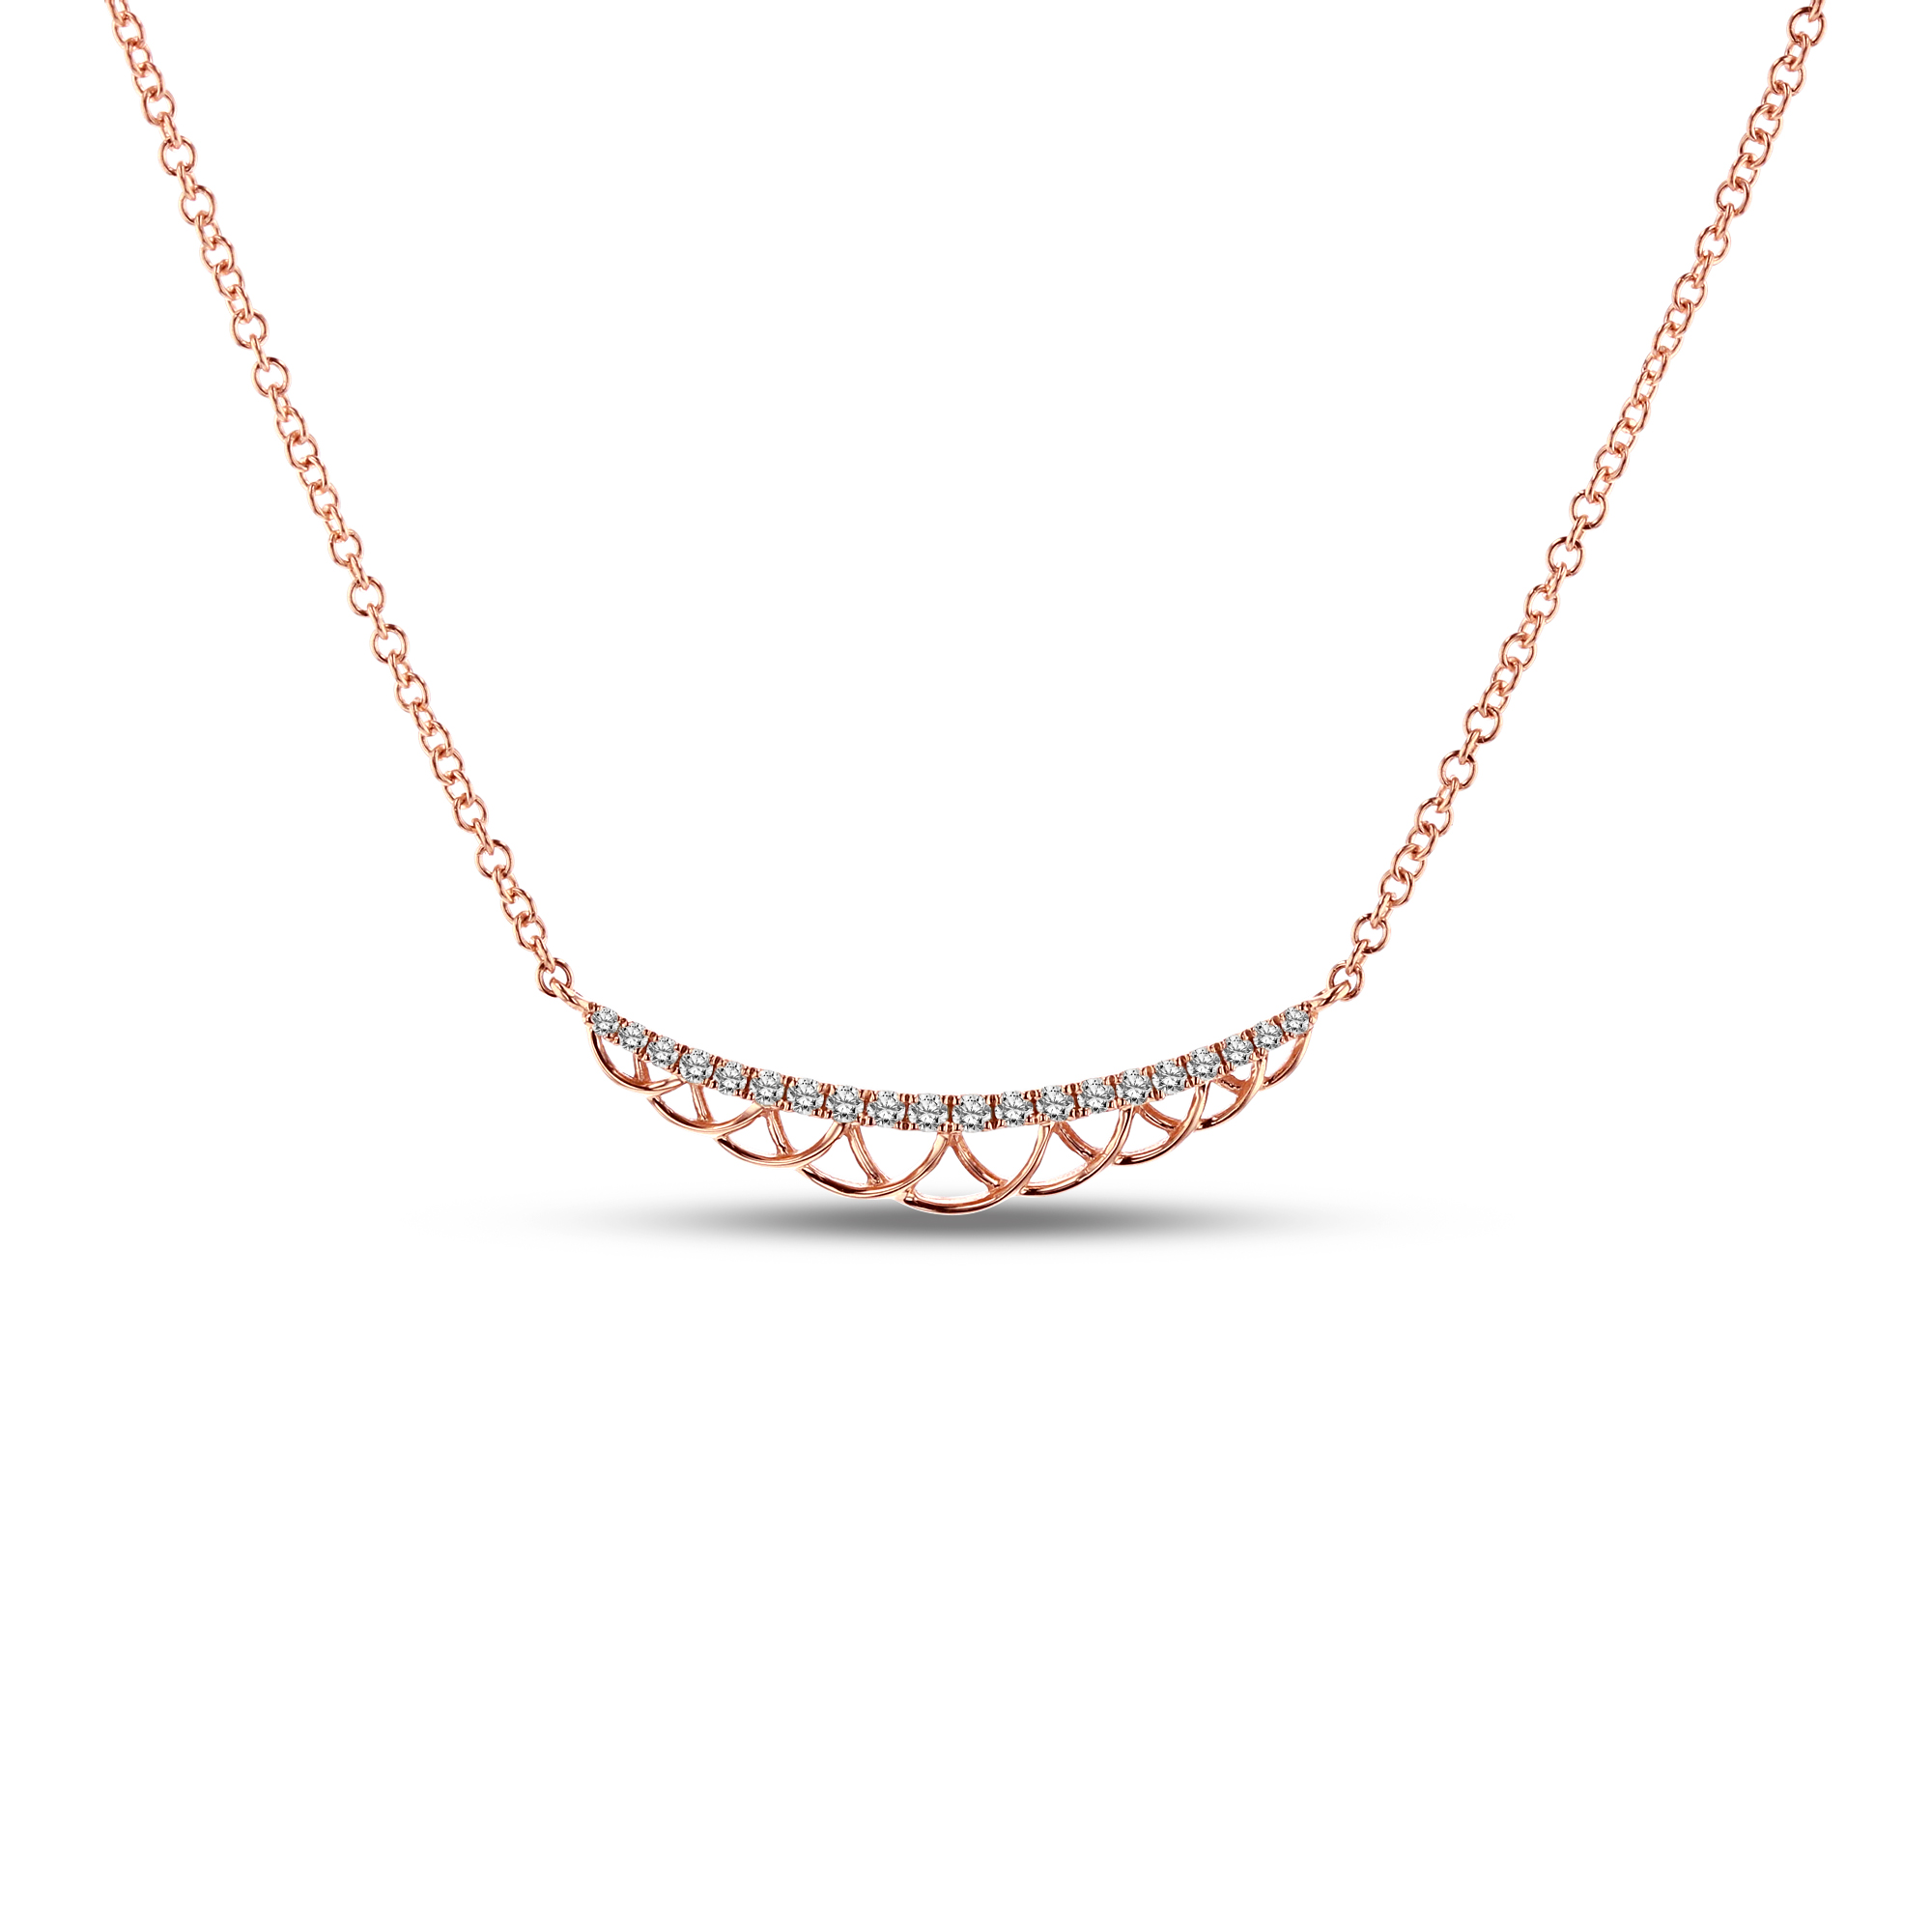 View 0.13ctw Diamond Fashion Necklace in 14k Rose Gold